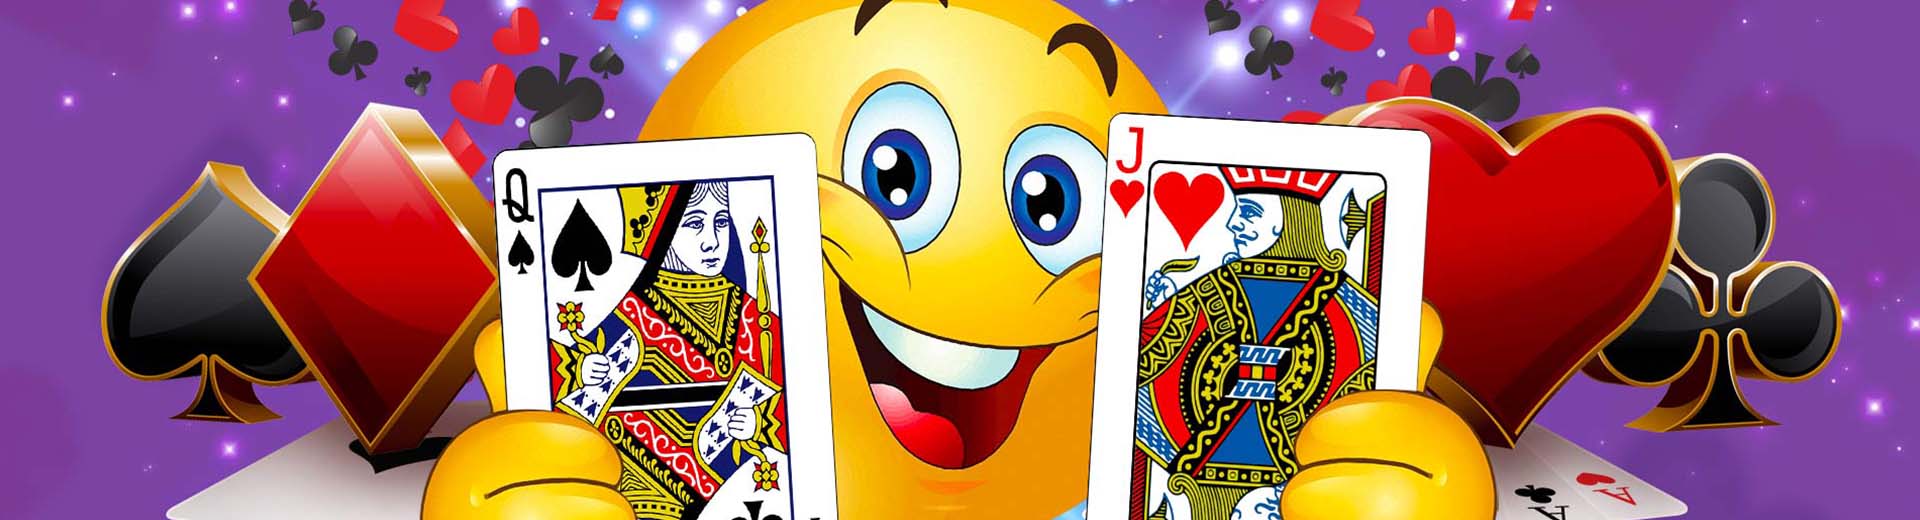 download pinochle game